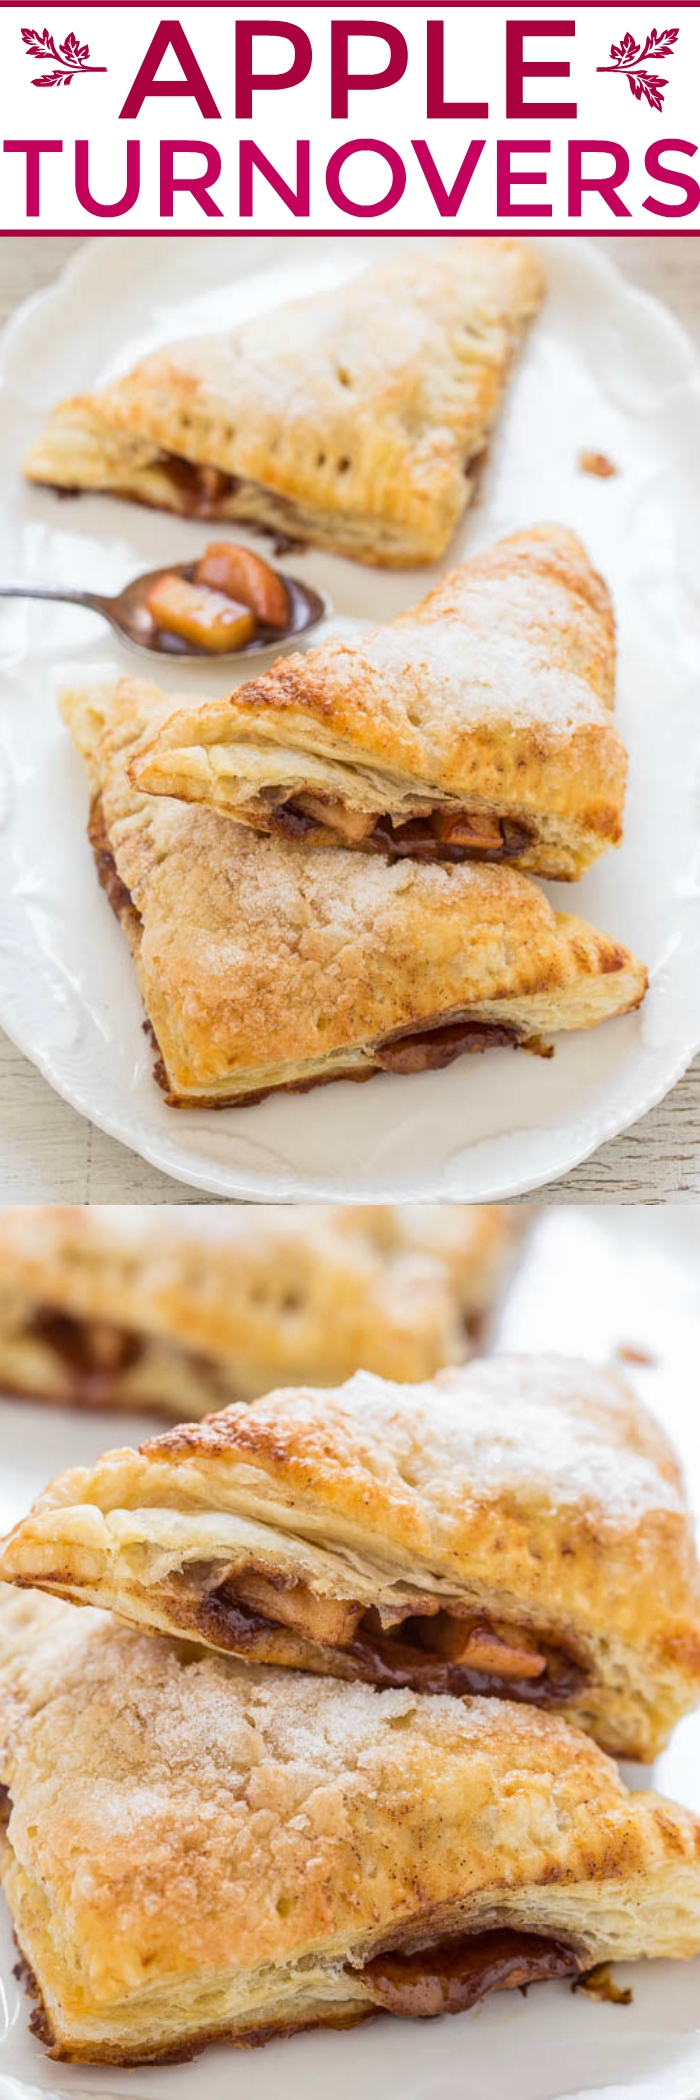 Puff Pastry Apple Turnovers — These apple turnovers take just 15 minutes to prep and are filled with the most incredible cinnamon apple filling. These are the ultimate fall dessert! 